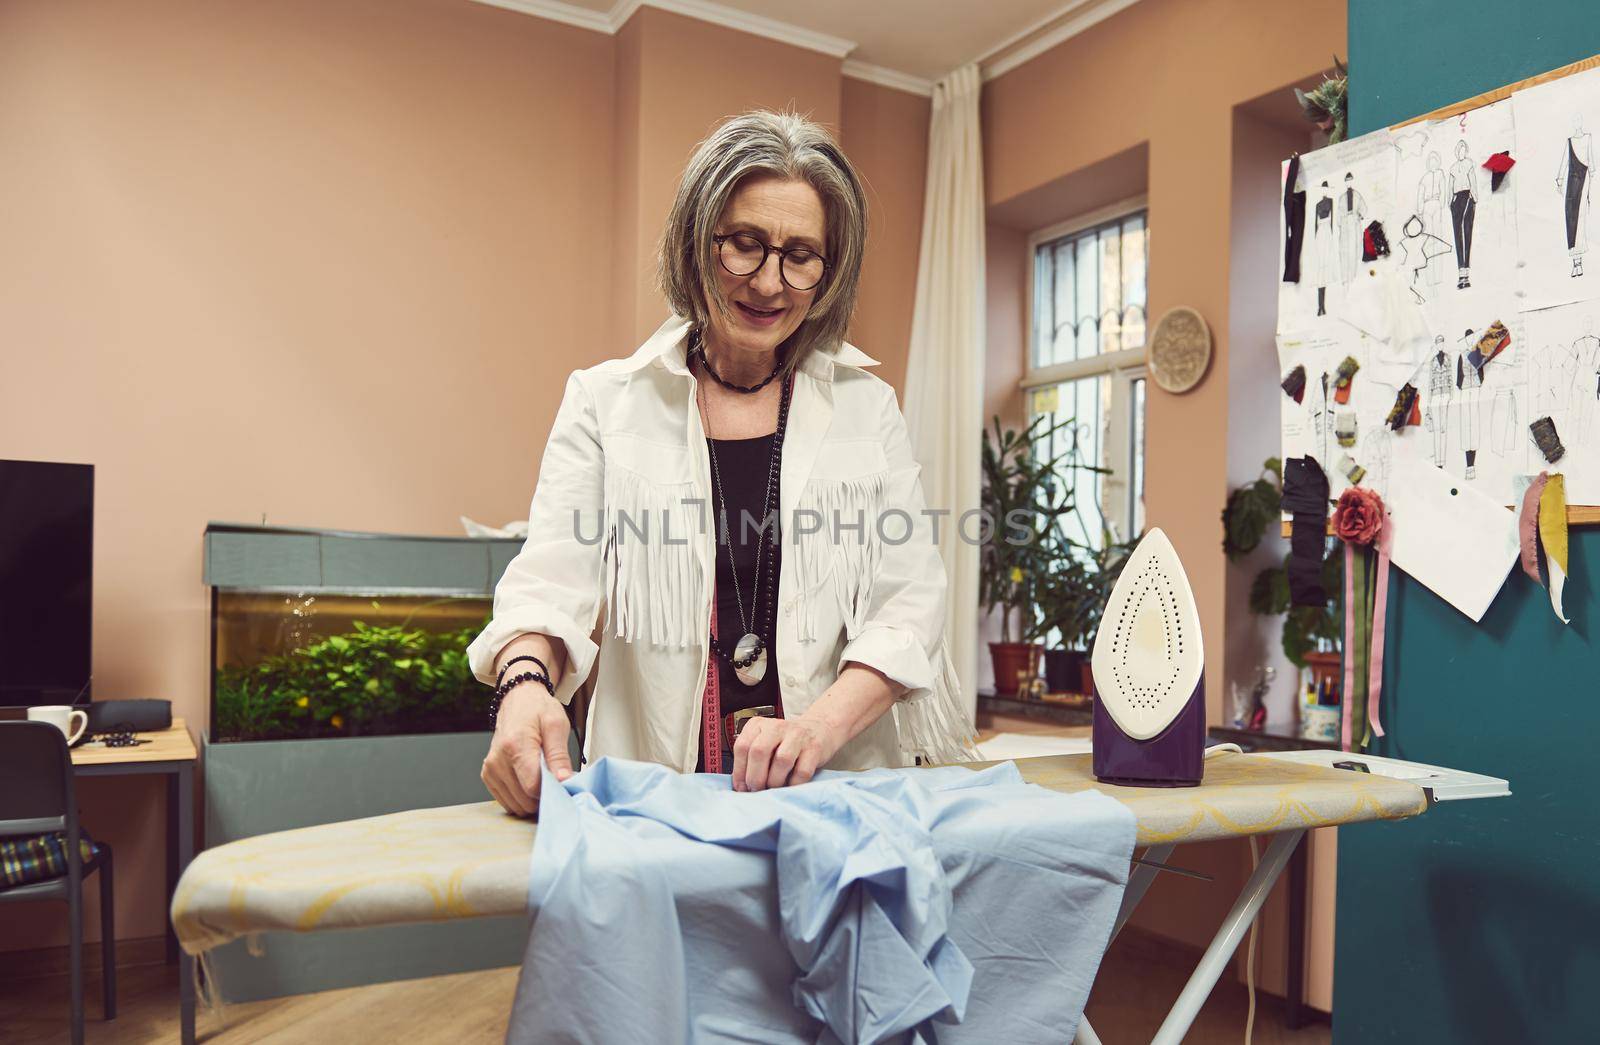 Mature 60 years old European woman fashion designer tailor ironing blue shirt from new collection in a tailoring atelier. Seamstress, sewer, craftswoman, needlewoman, dressmaker, fashion stylist by artgf